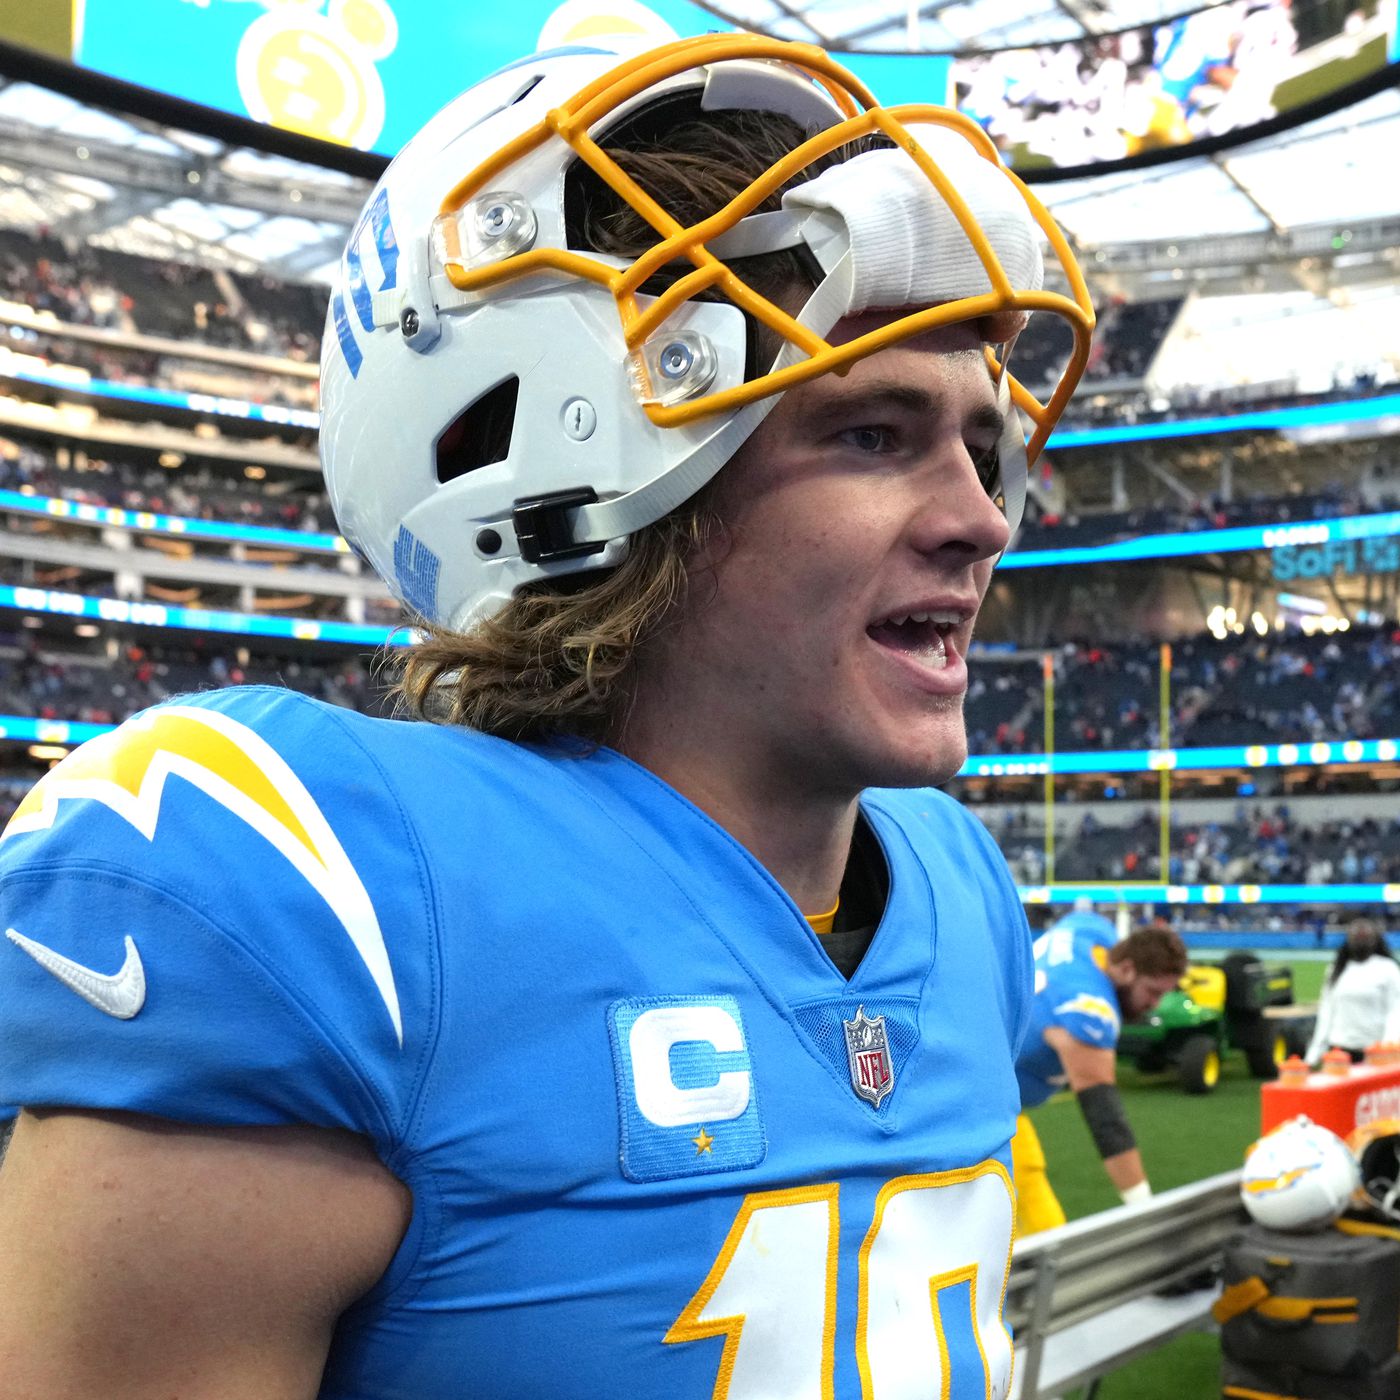 La Chargers Schedule 2022 La Chargers Opponents 2022: Complete List As Season Ends, Ahead Of Schedule  Release - Draftkings Nation